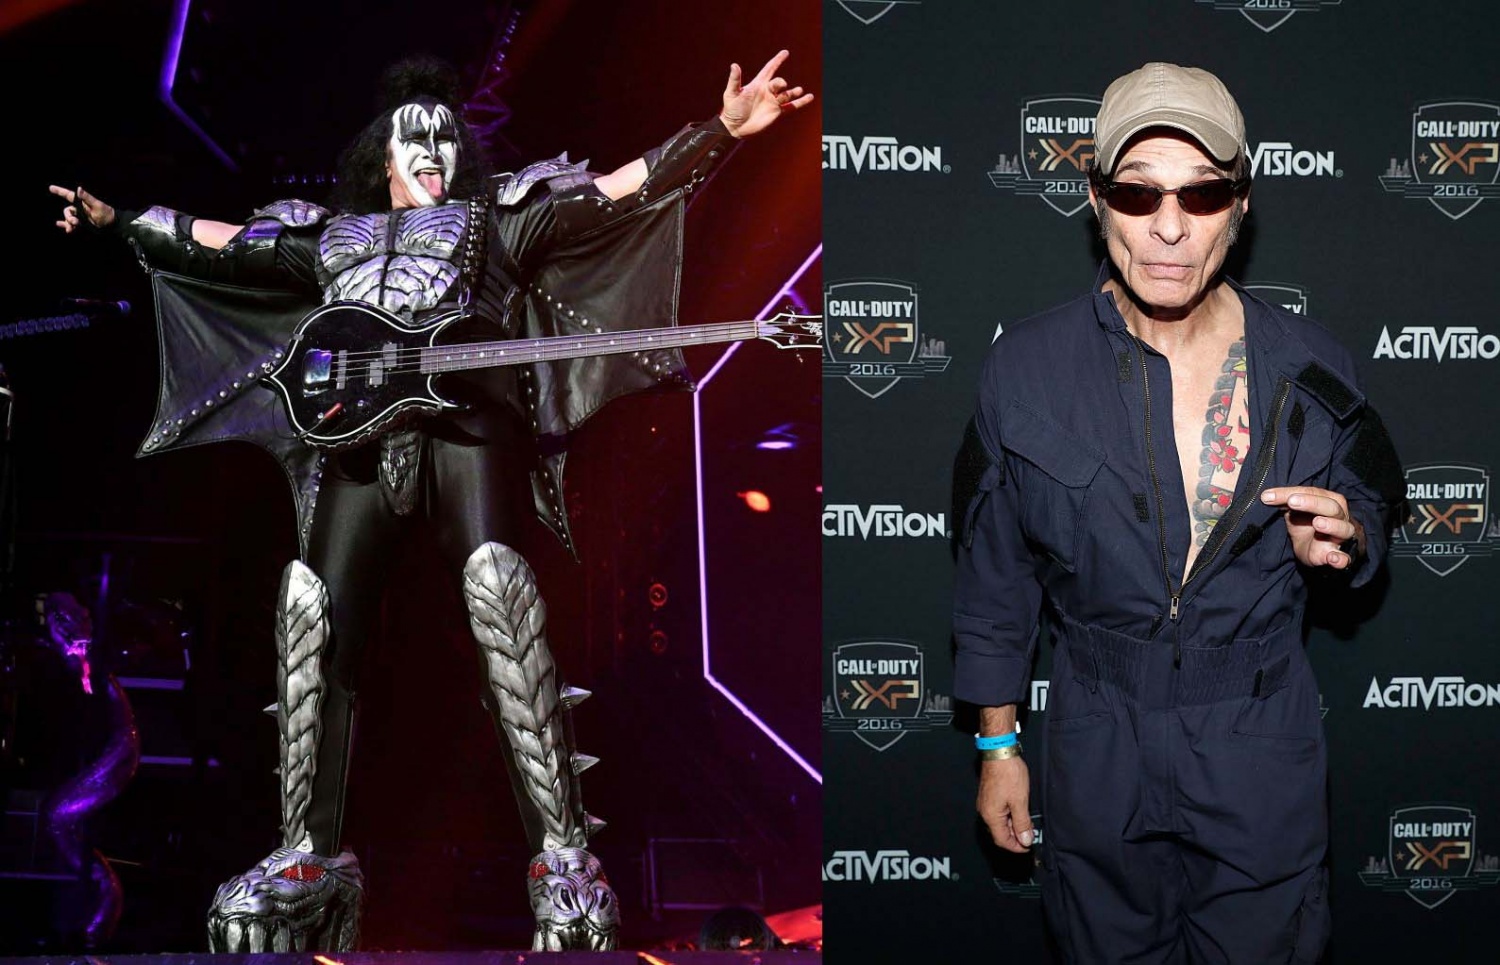 KISS’s Gene Simmons and Van Halen’s Ex-Singer David Lee Roth Publicize Their Beef And Insults - What Happened?